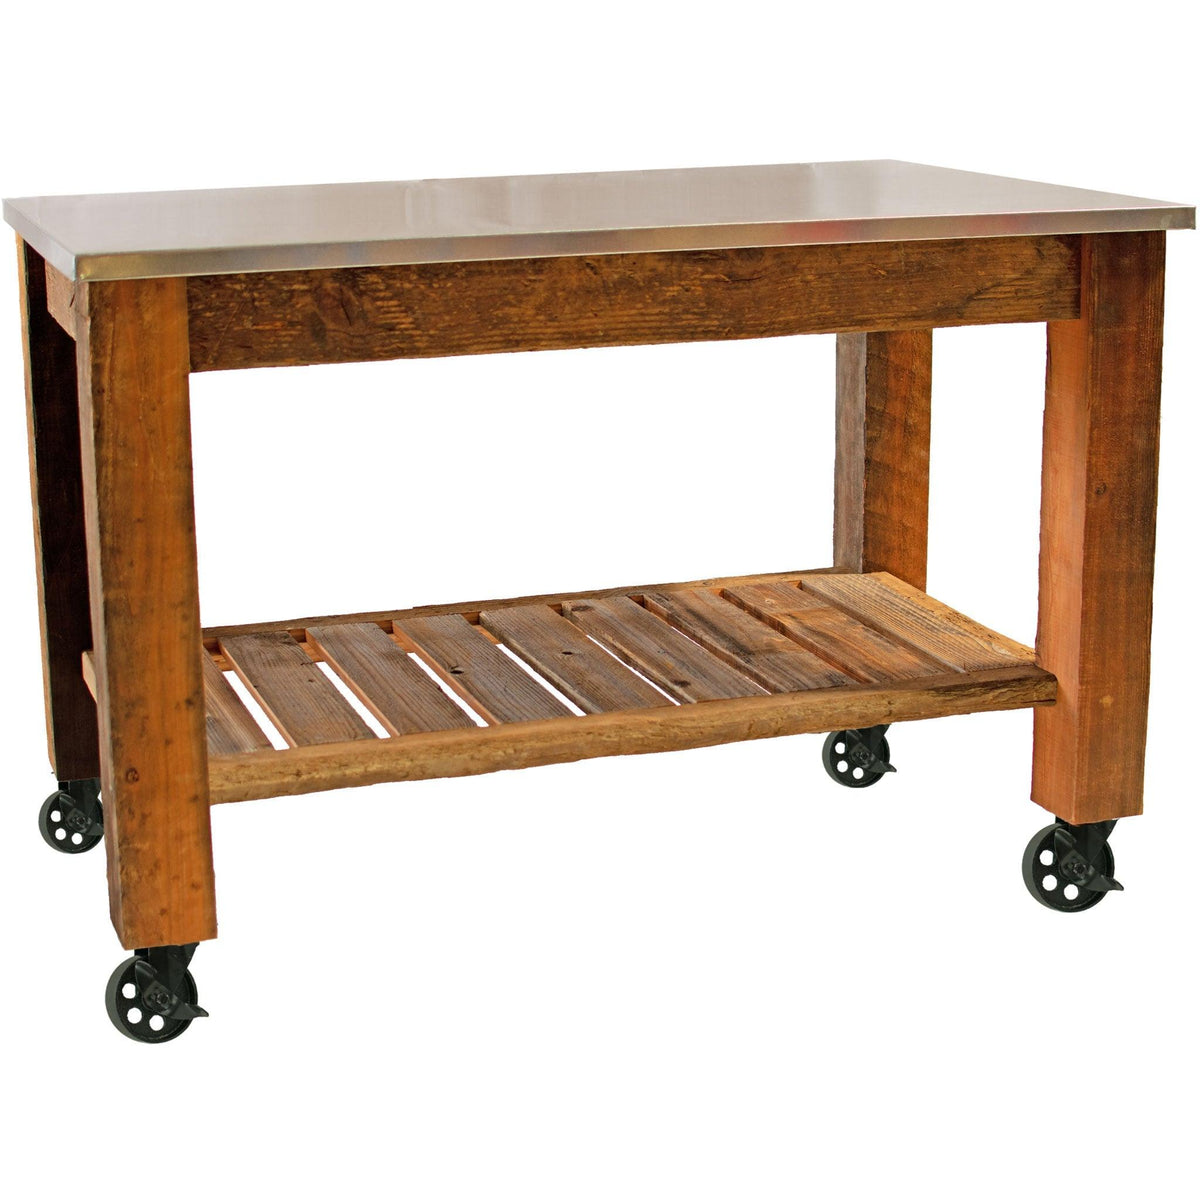 Lee Display's Redwood Potting Table Rolling Cart with 5in Black Casters without Hardware Included on sale now at leedisplay.com